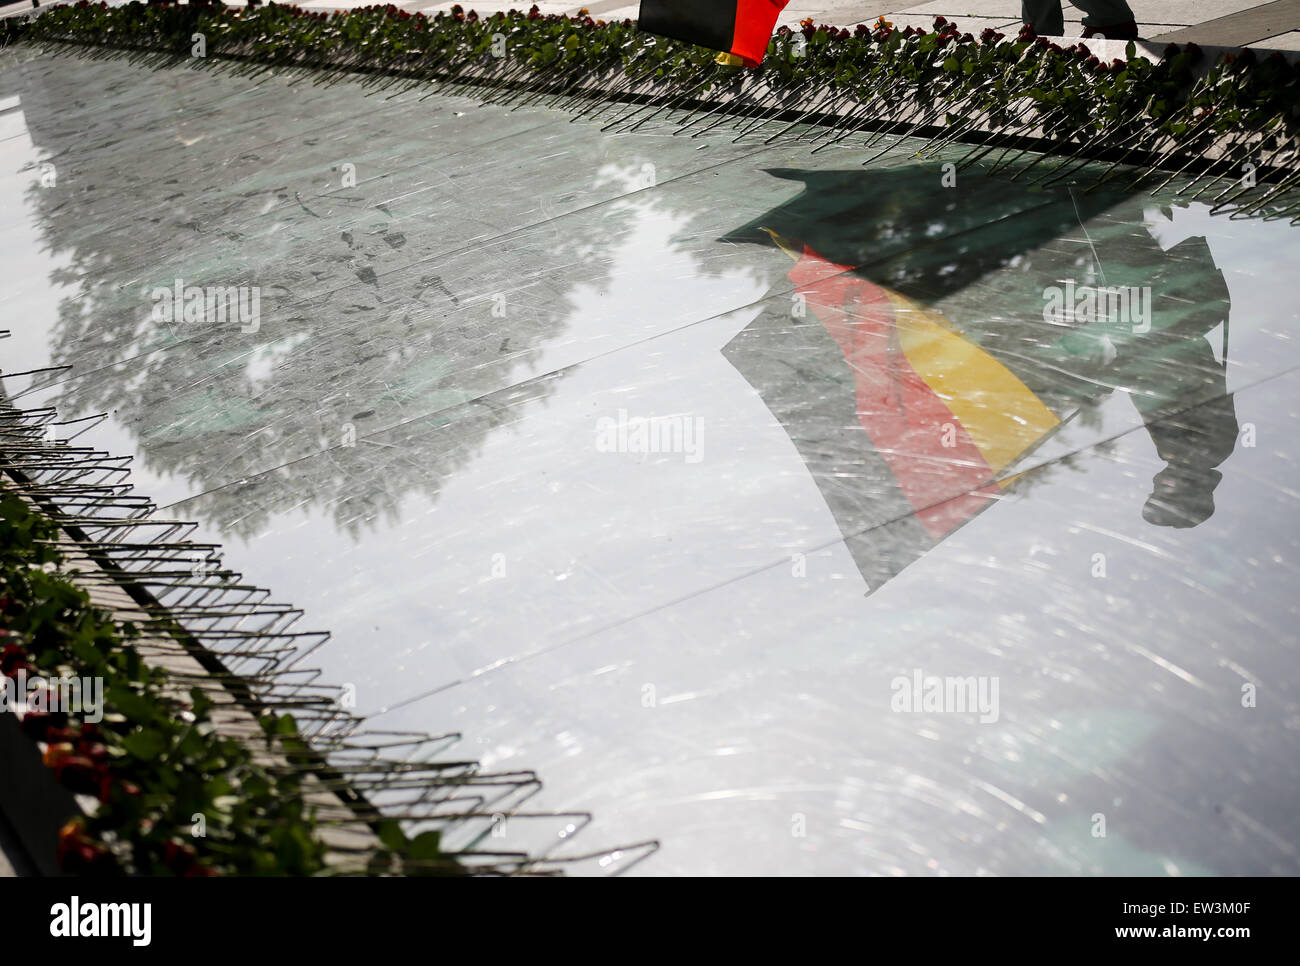 Berlin, Germany. 17th June, 2015. A flag is reflected in the glass of the memorial in front of the Finance Ministry at the site of the people's revolt in Berlin, Germany, 17 June 2015. 62 years ago over one million people took to the streets in around 700 GDR locations. The revolt was defeated with tanks from the Soviet occupying forces. Photo: KAY NIETFELD/dpa/Alamy Live News Stock Photo